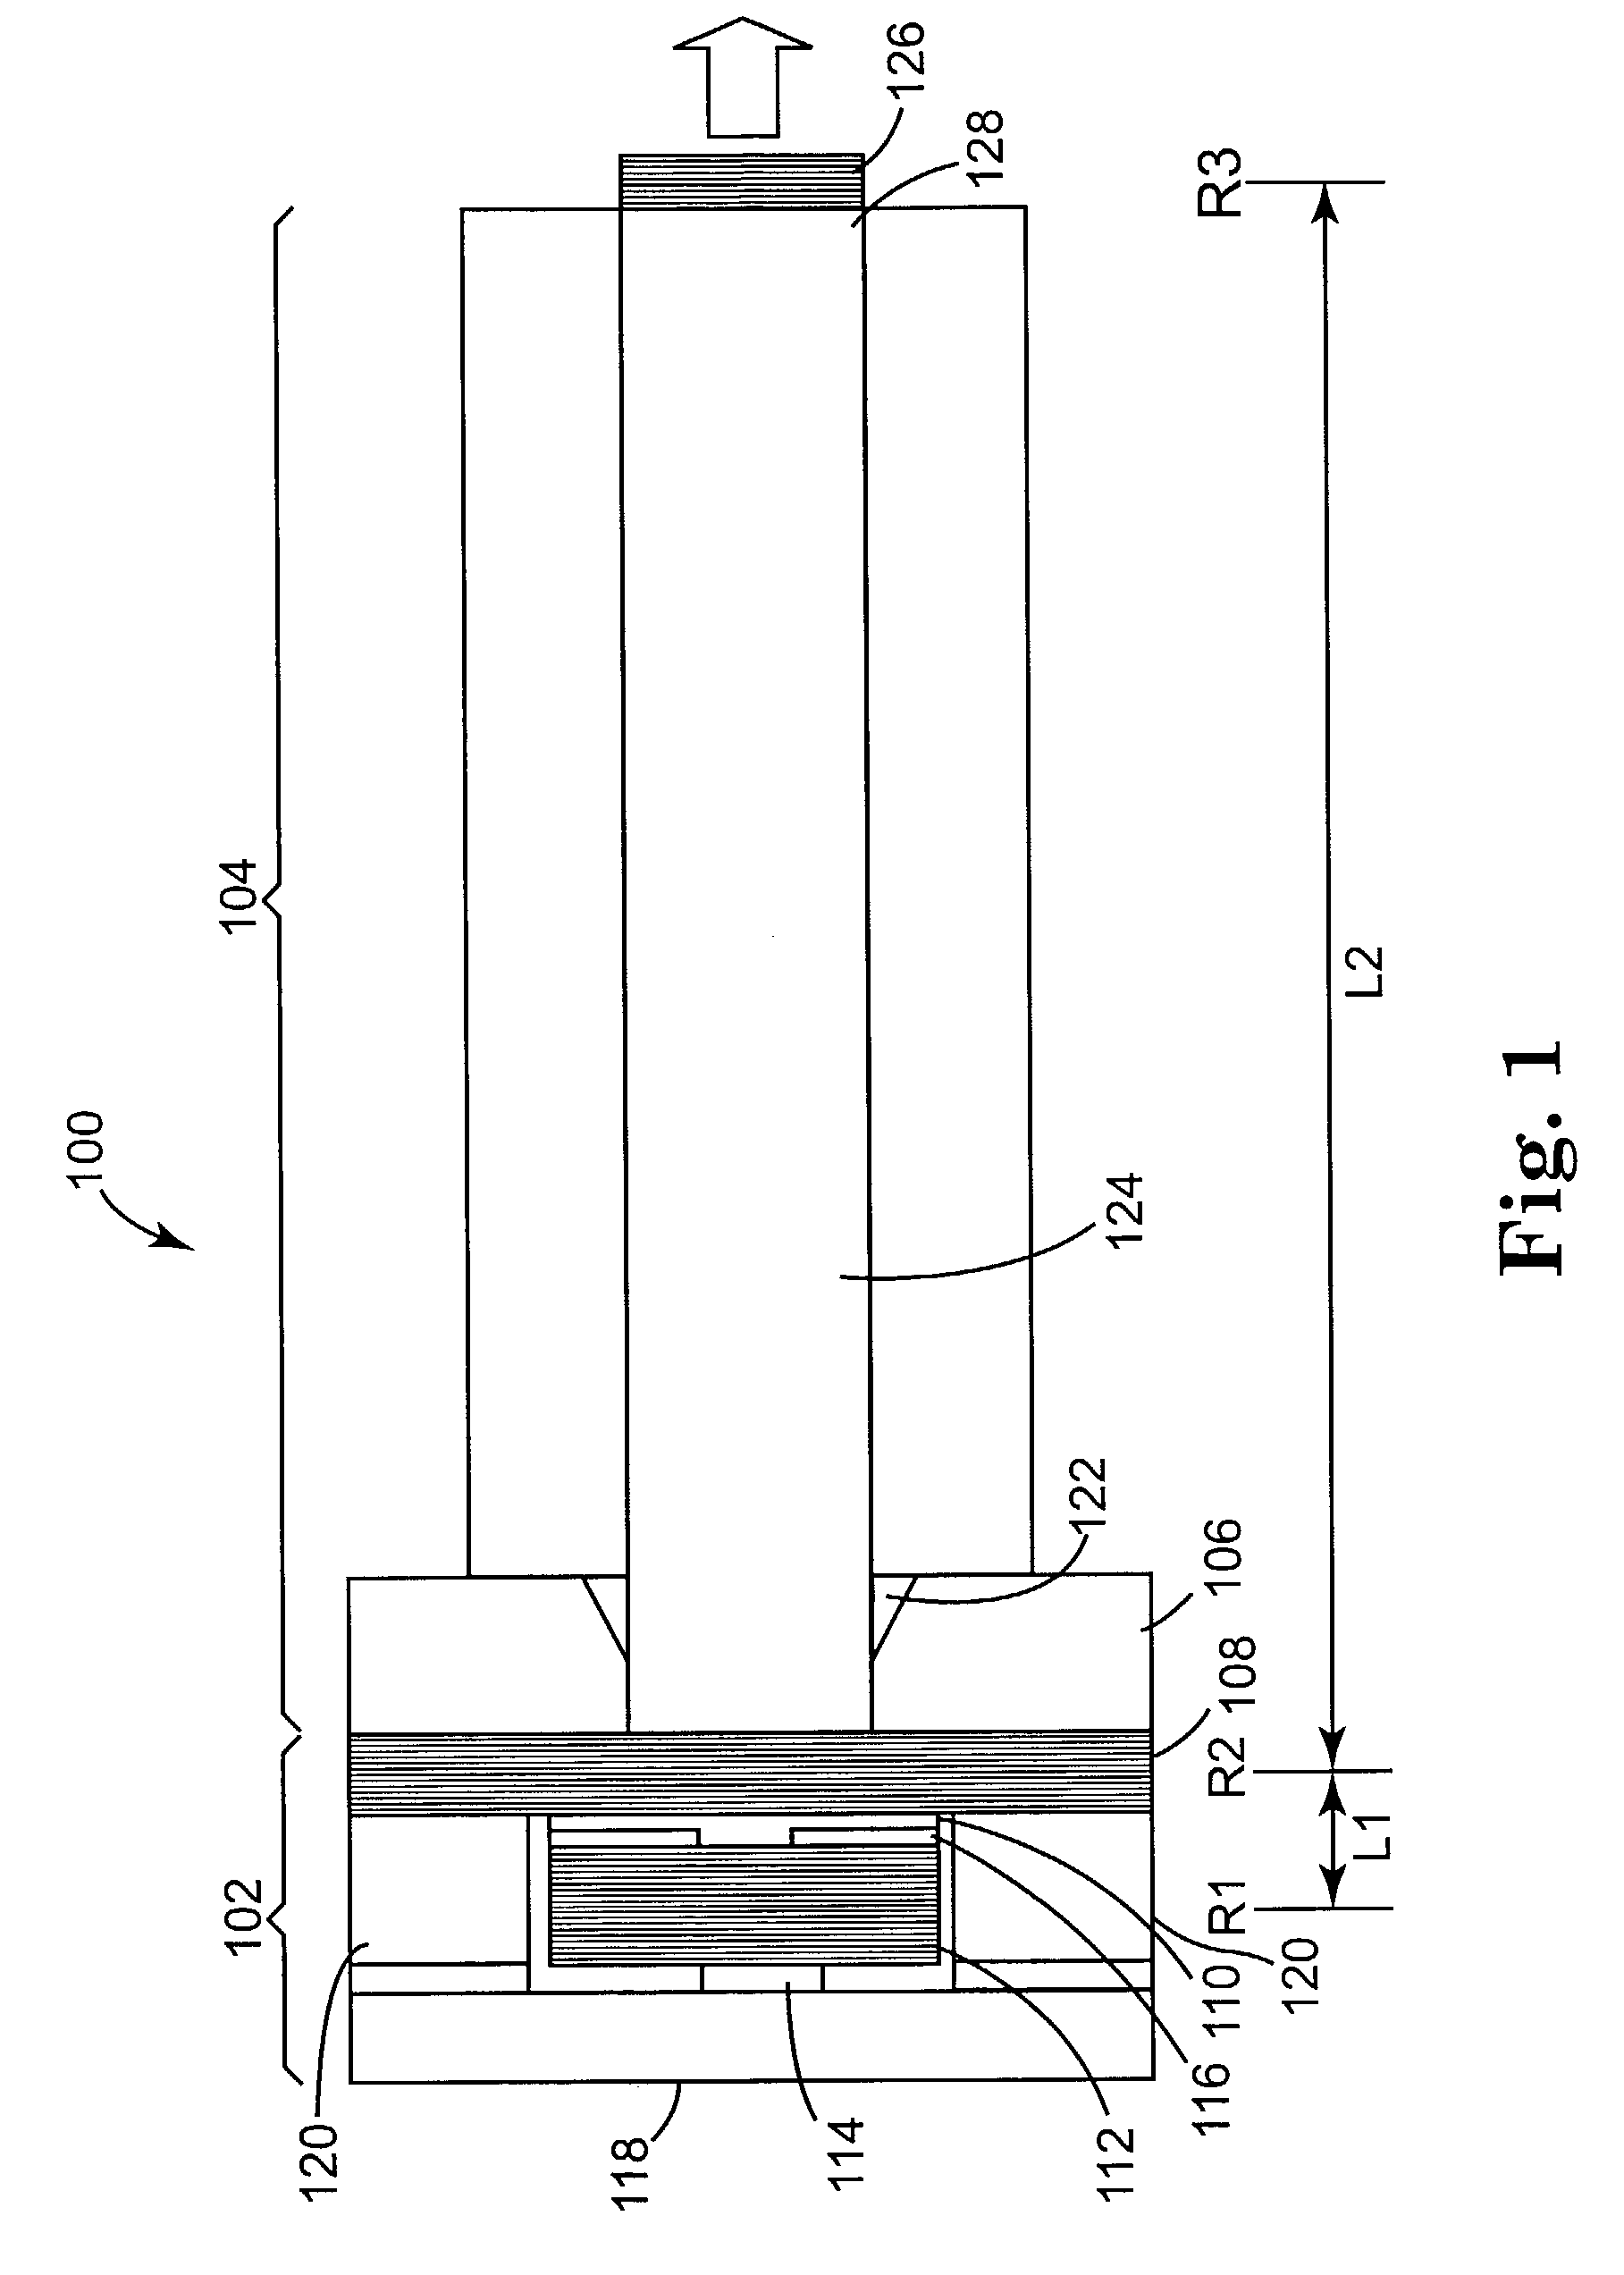 Fiber extended, semiconductor laser